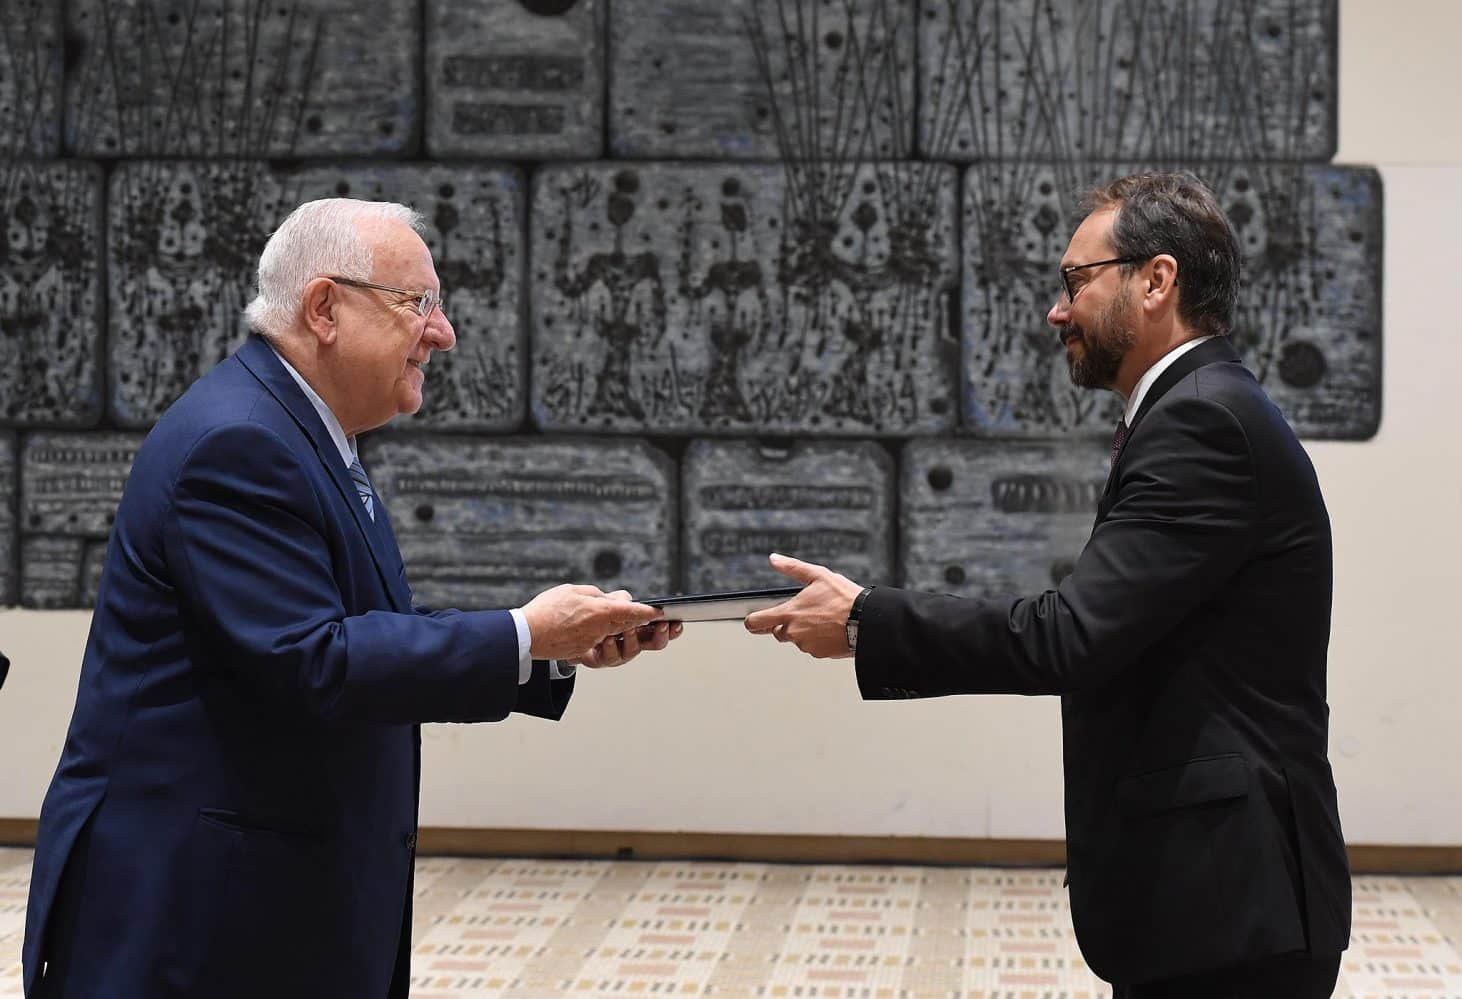 reuven_rivlin_receives_the_credential_of_the_new_ambassador_from_the_european_union_october_2017_3536